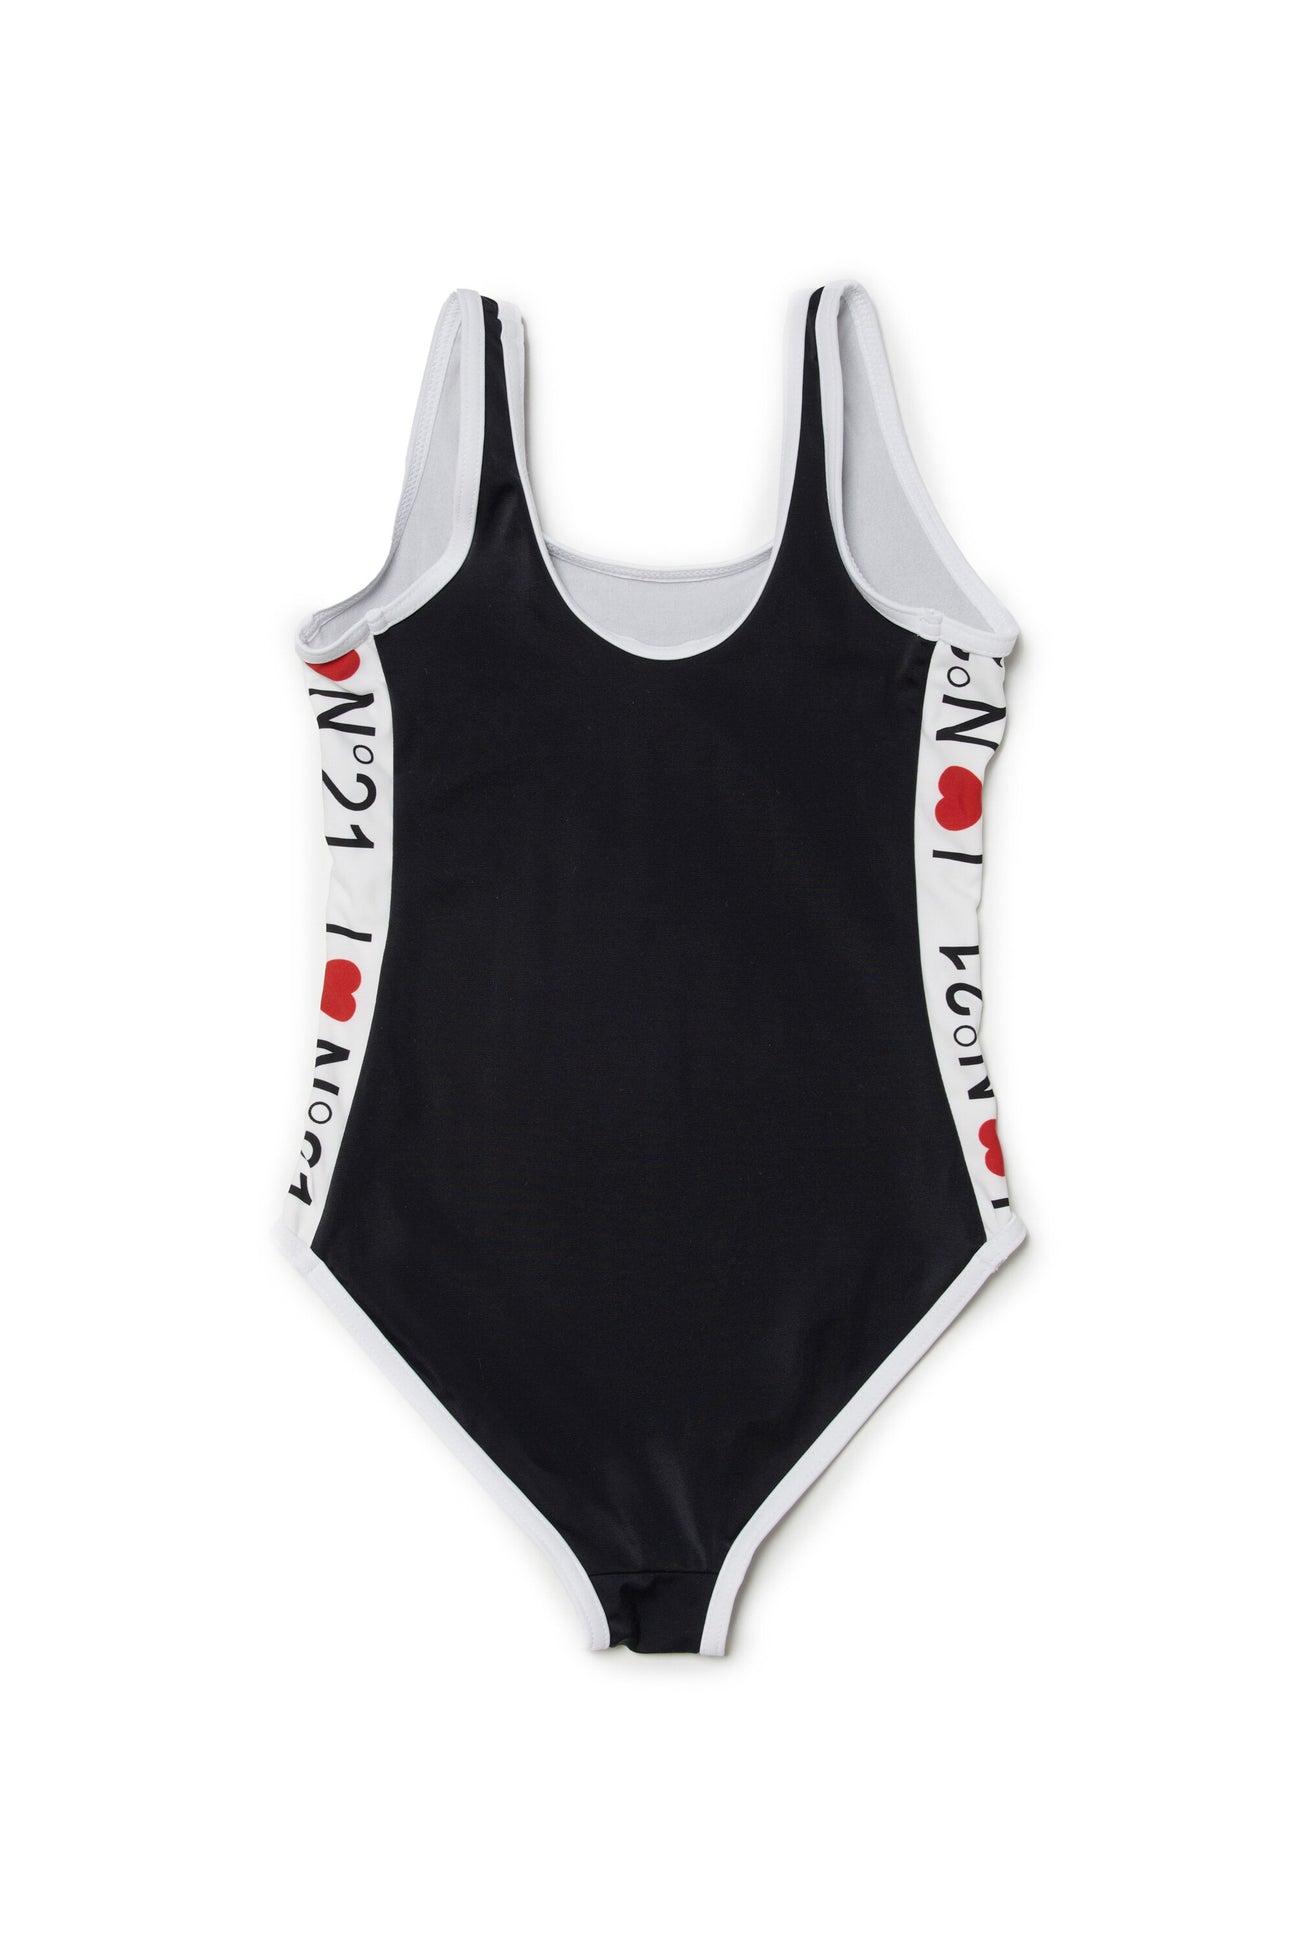 Lycra one-piece swimsuit branded with I Love N°21 logo Lycra one-piece swimsuit branded with I Love N°21 logo